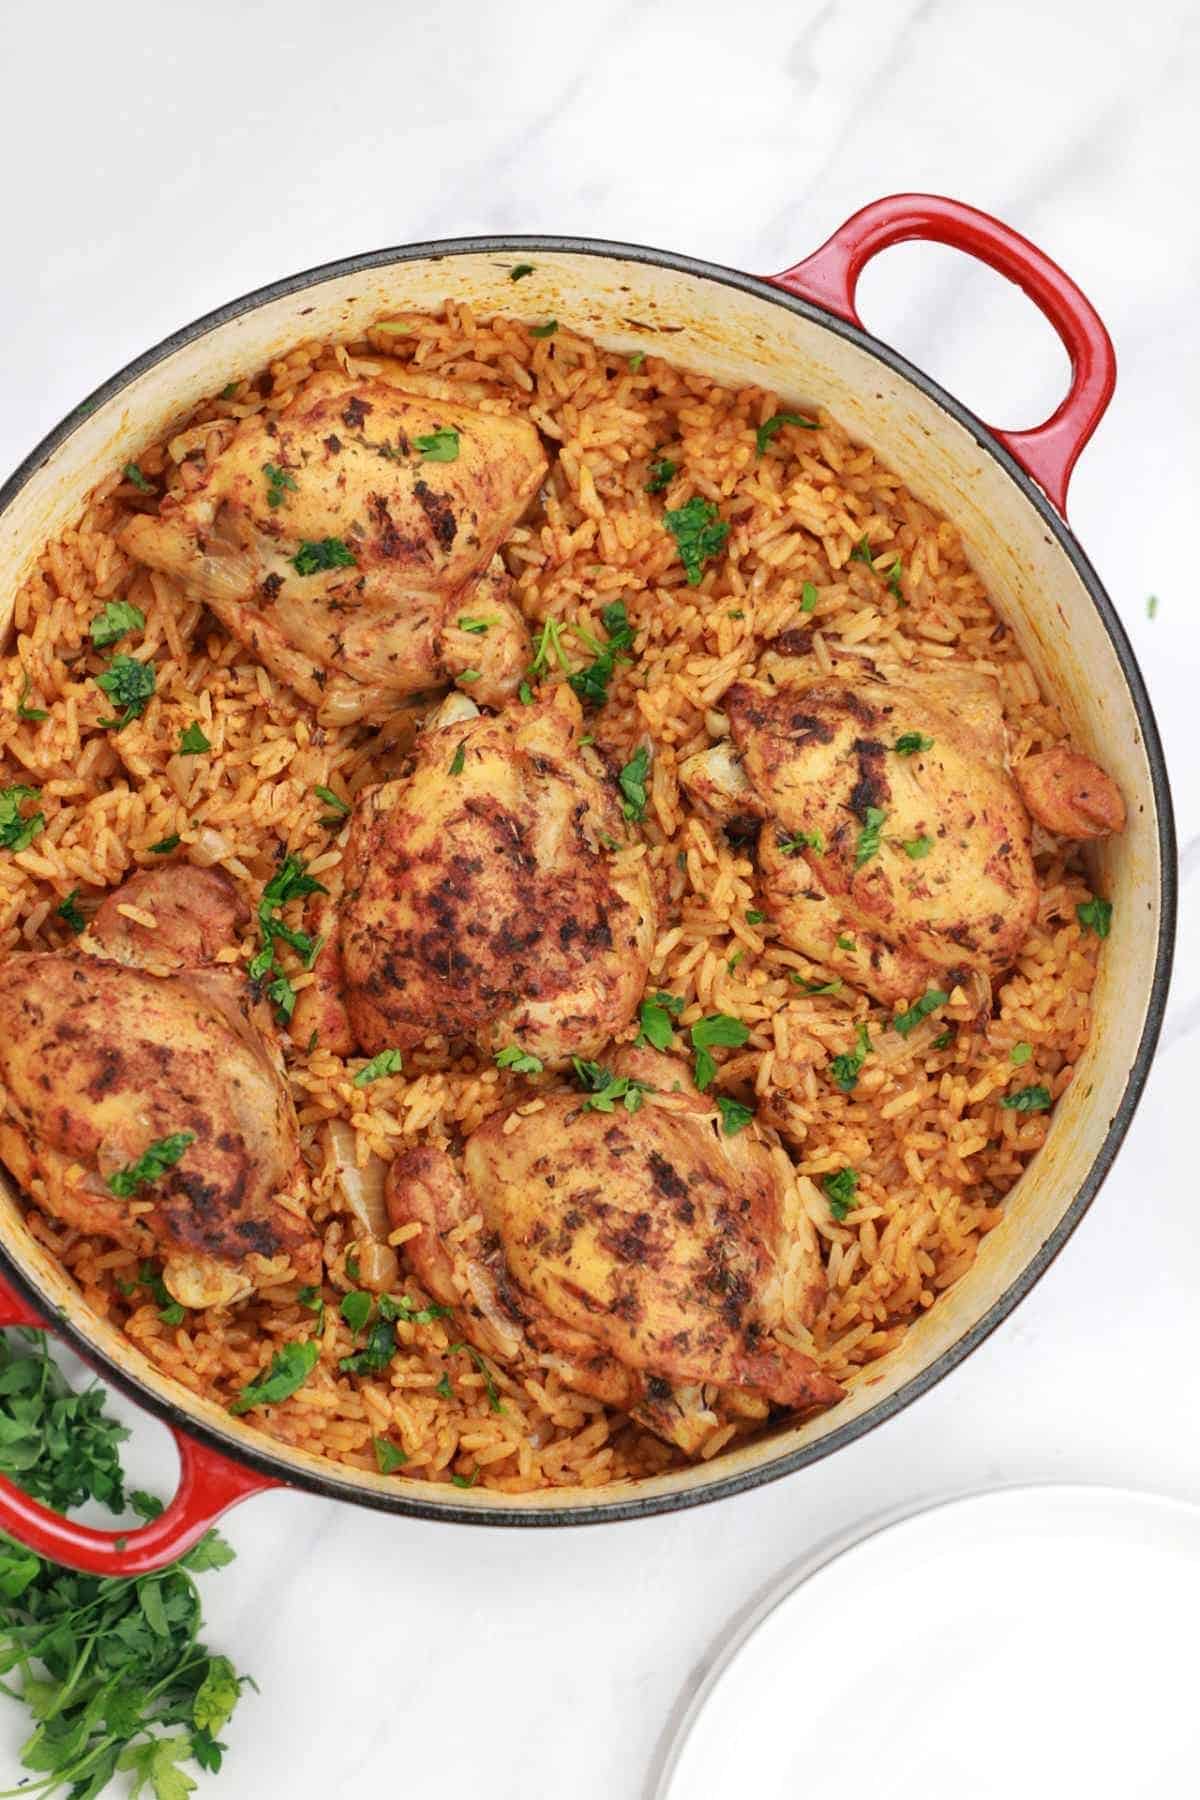 rice and chicken garnished with parsley.